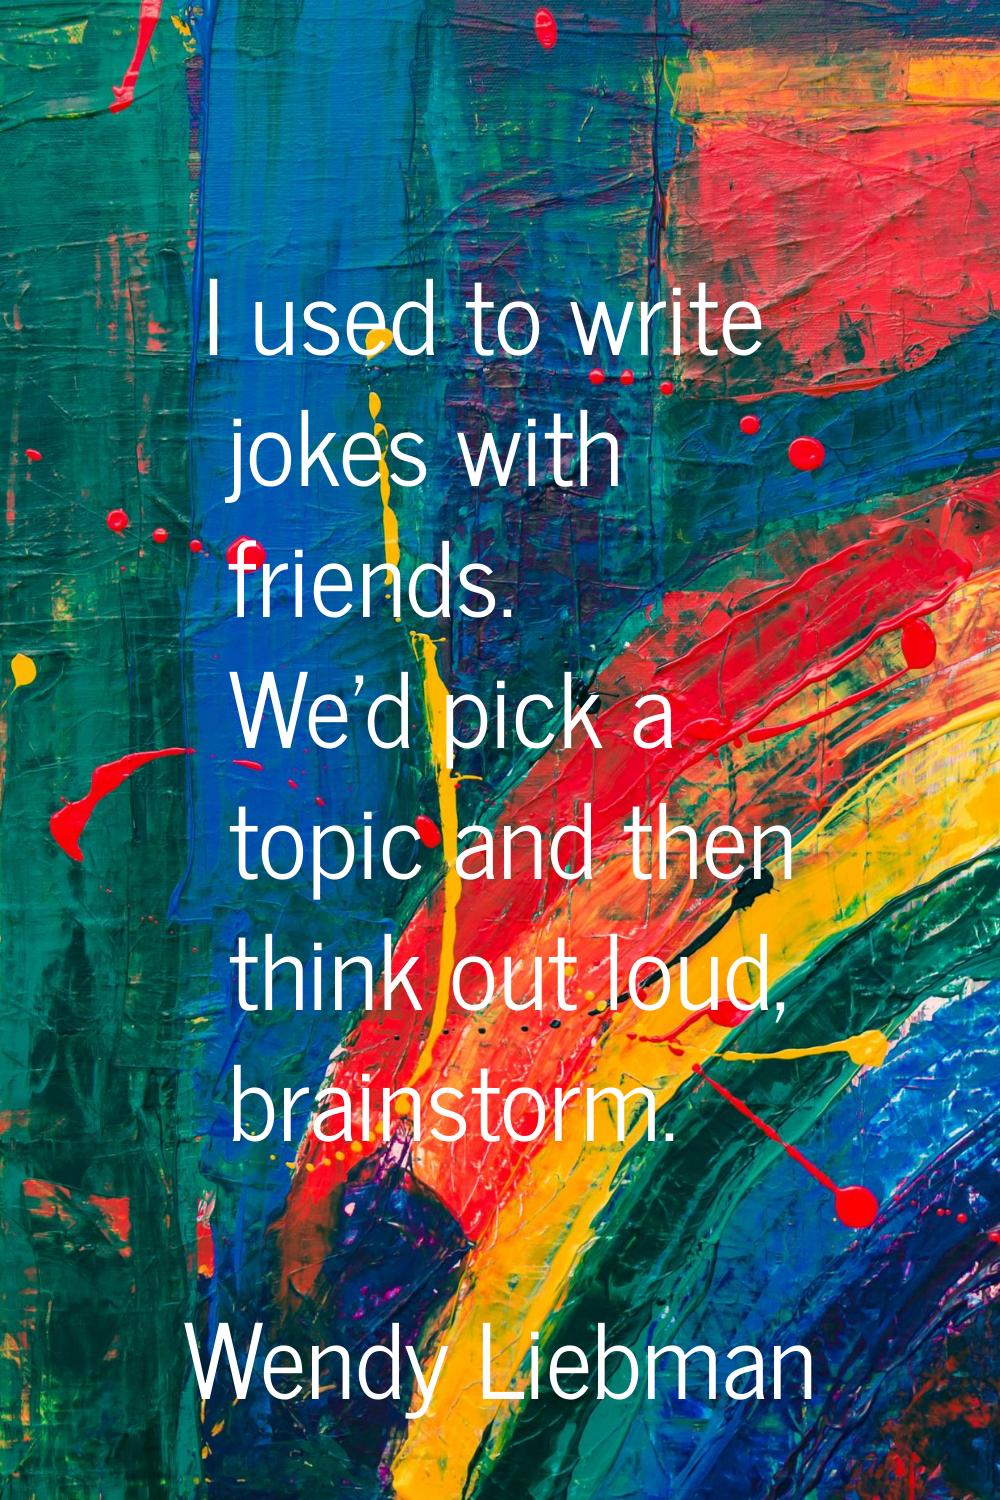 I used to write jokes with friends. We'd pick a topic and then think out loud, brainstorm.